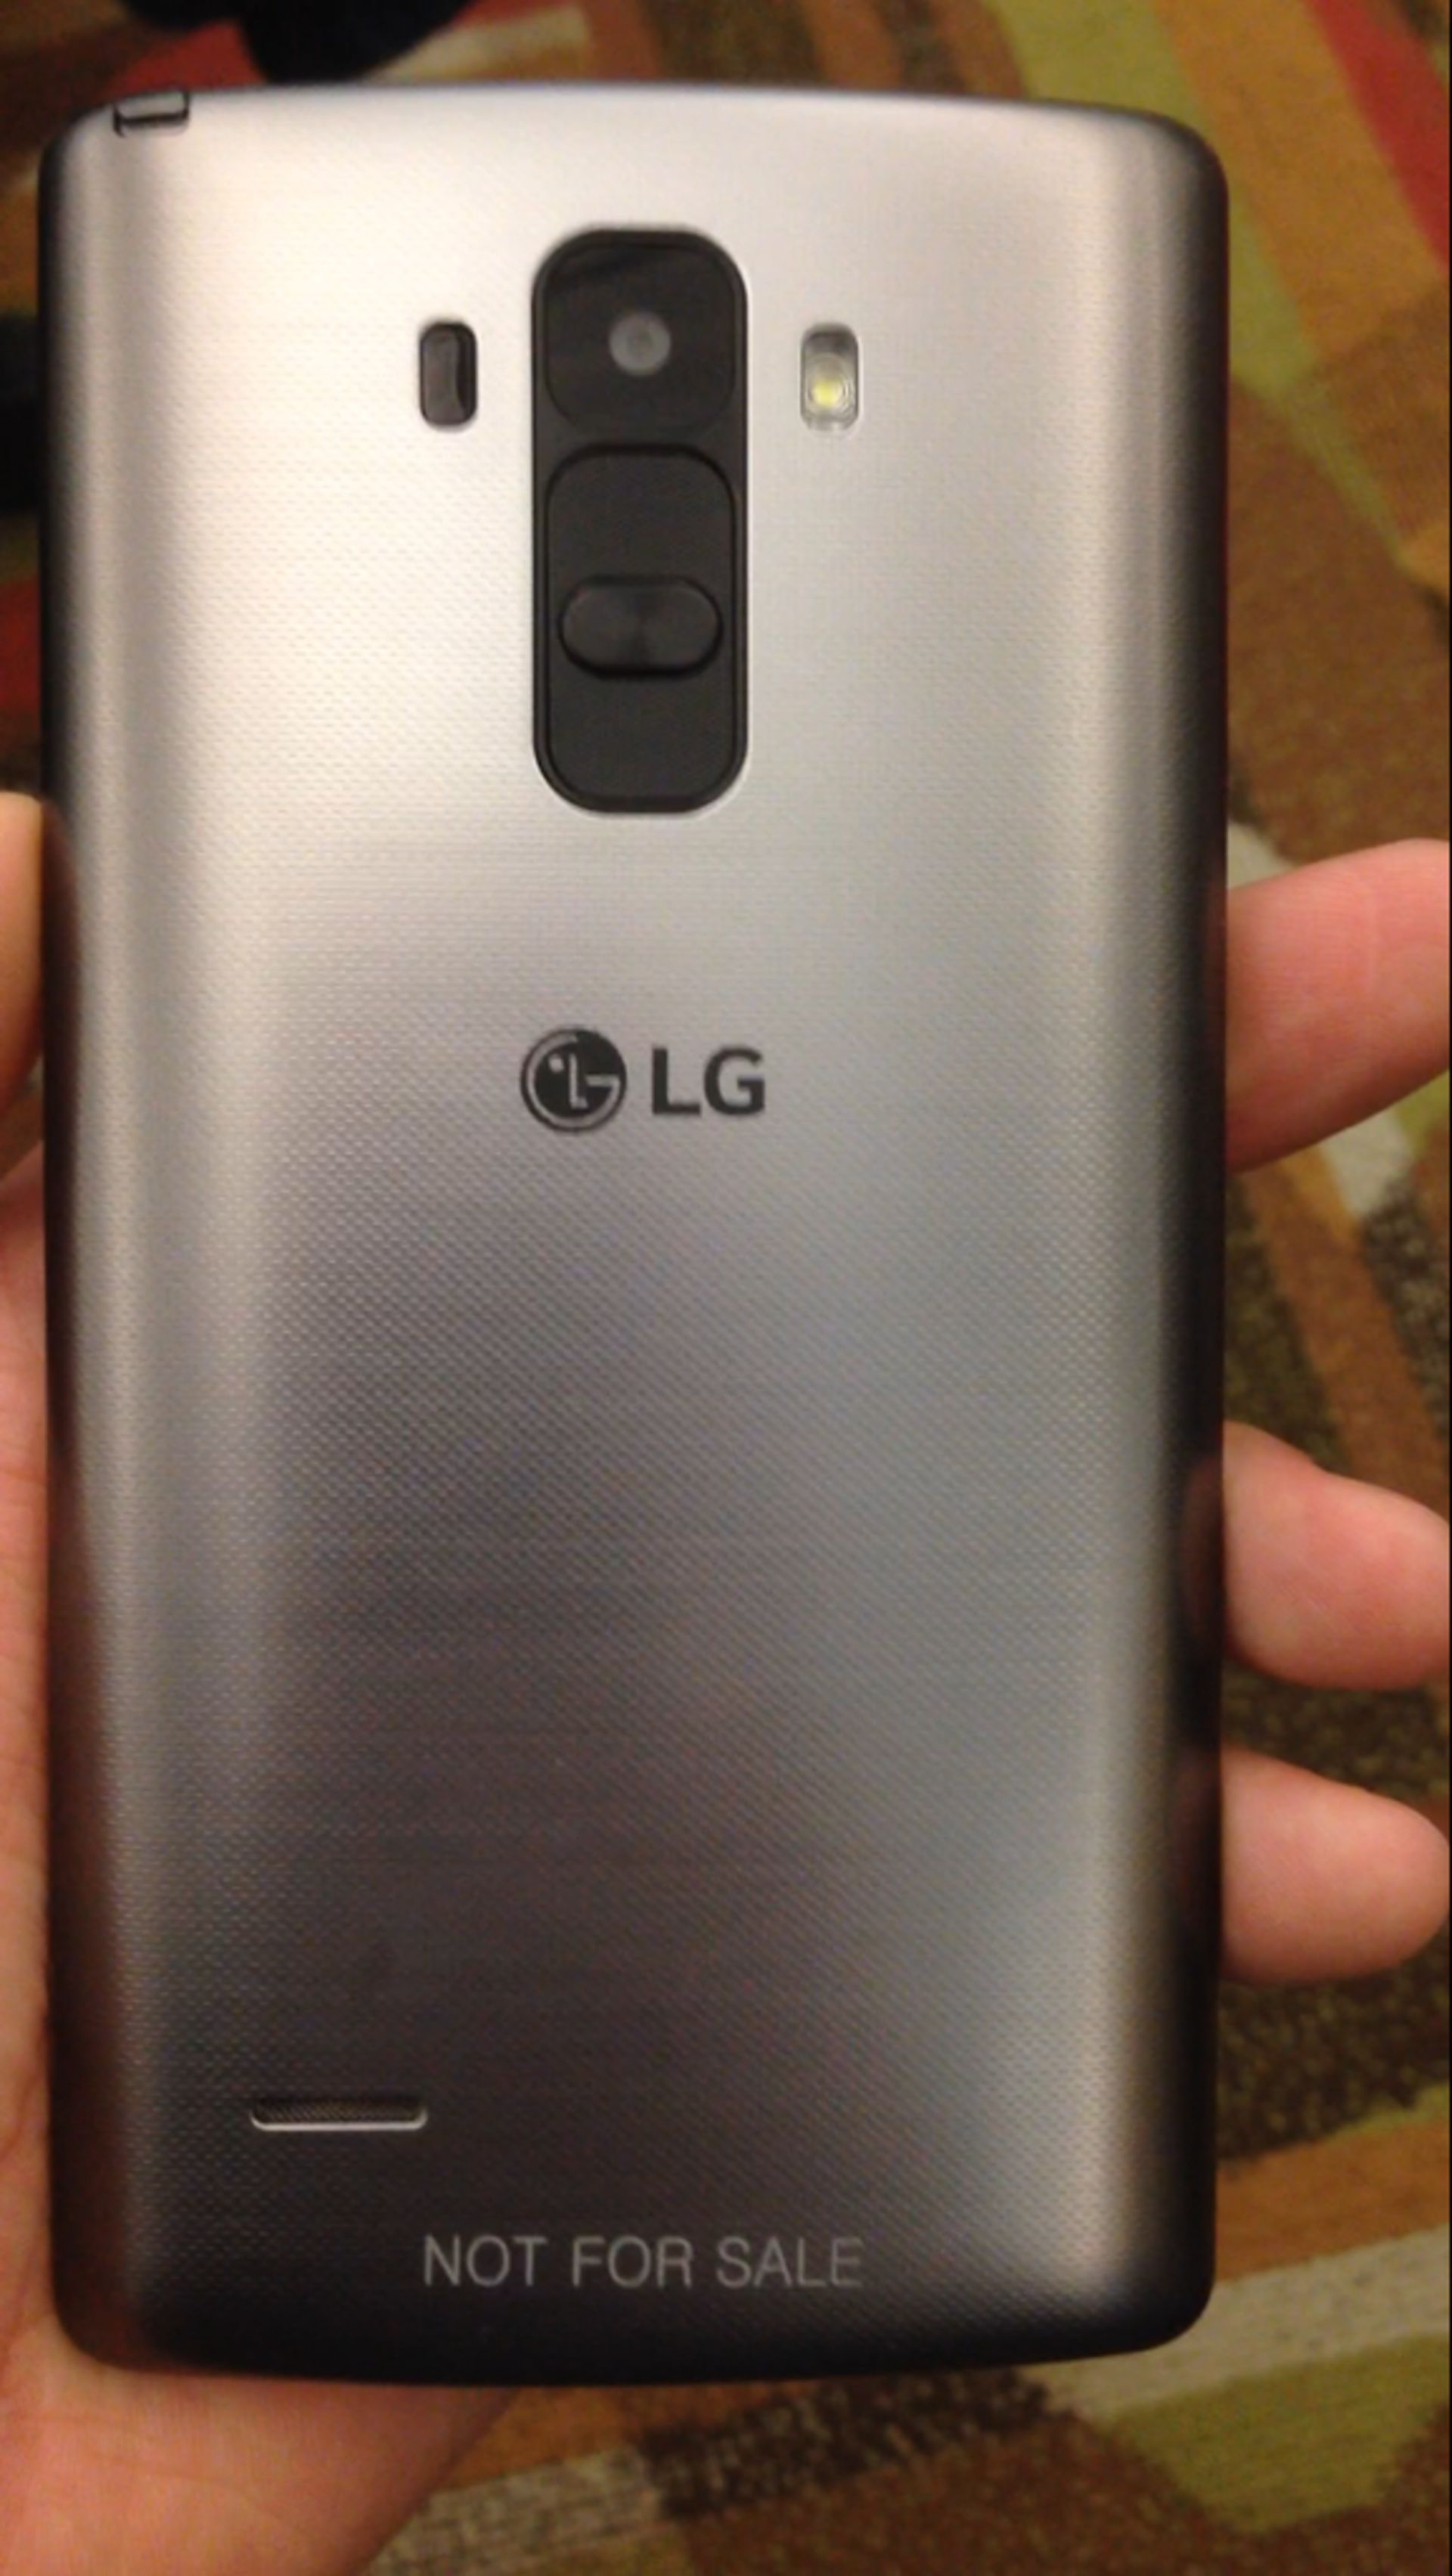 Photos-allegedly-showing-the-LG-G4-or-G4-Note3